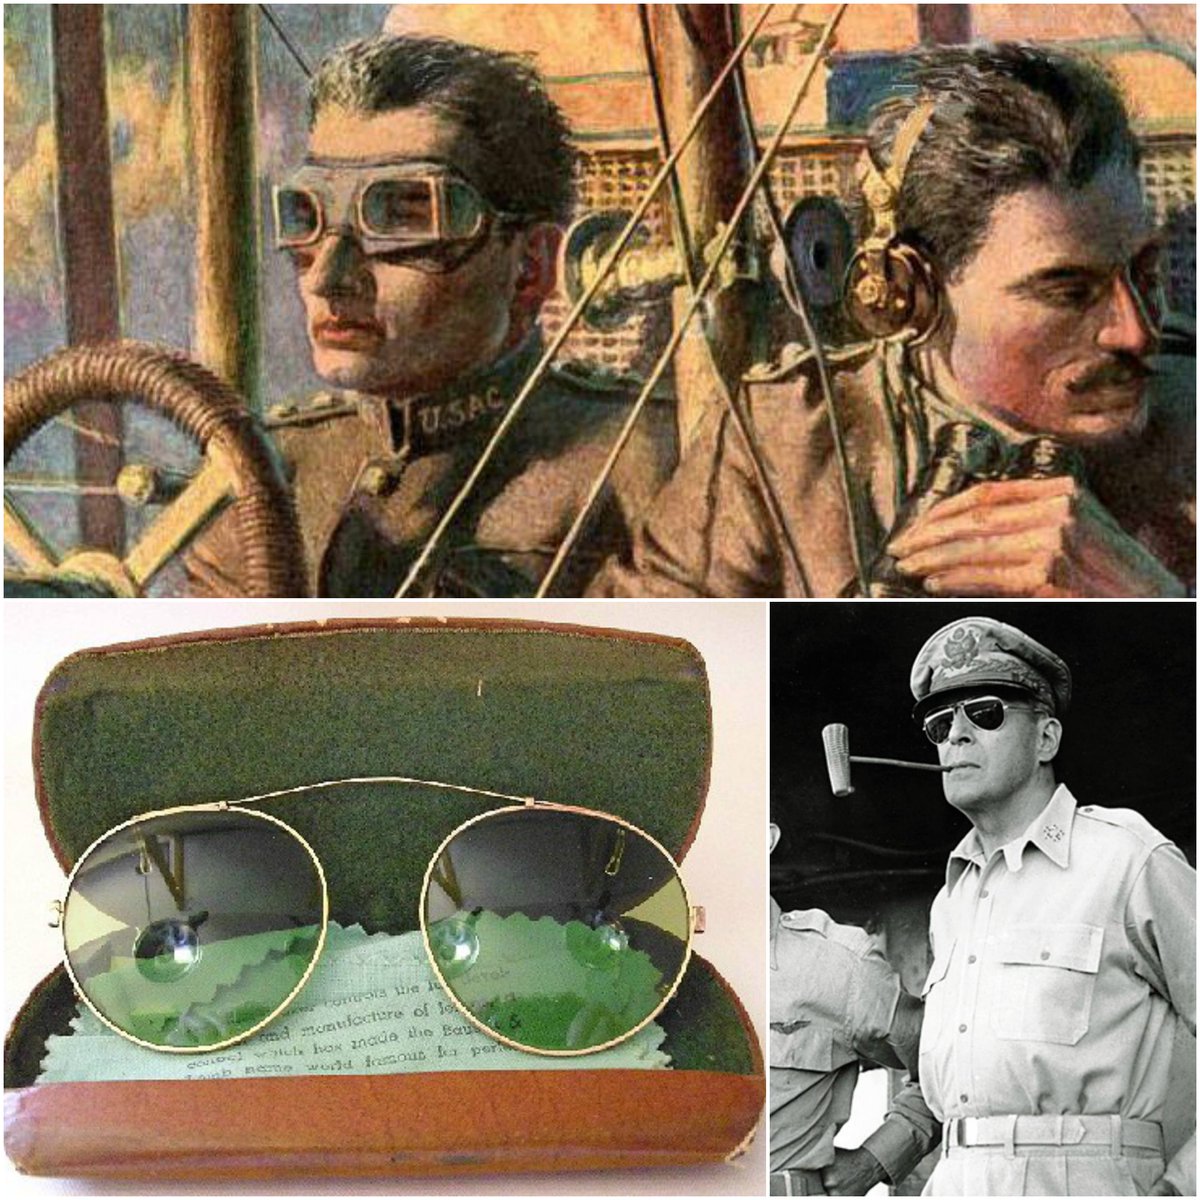 CMH on Twitter: "In 1929, US Army Air Corps Lt Gen John MacCready asked a New York-based medical equipment manufacturer, to create sunglasses to ban sun rays and reduce the